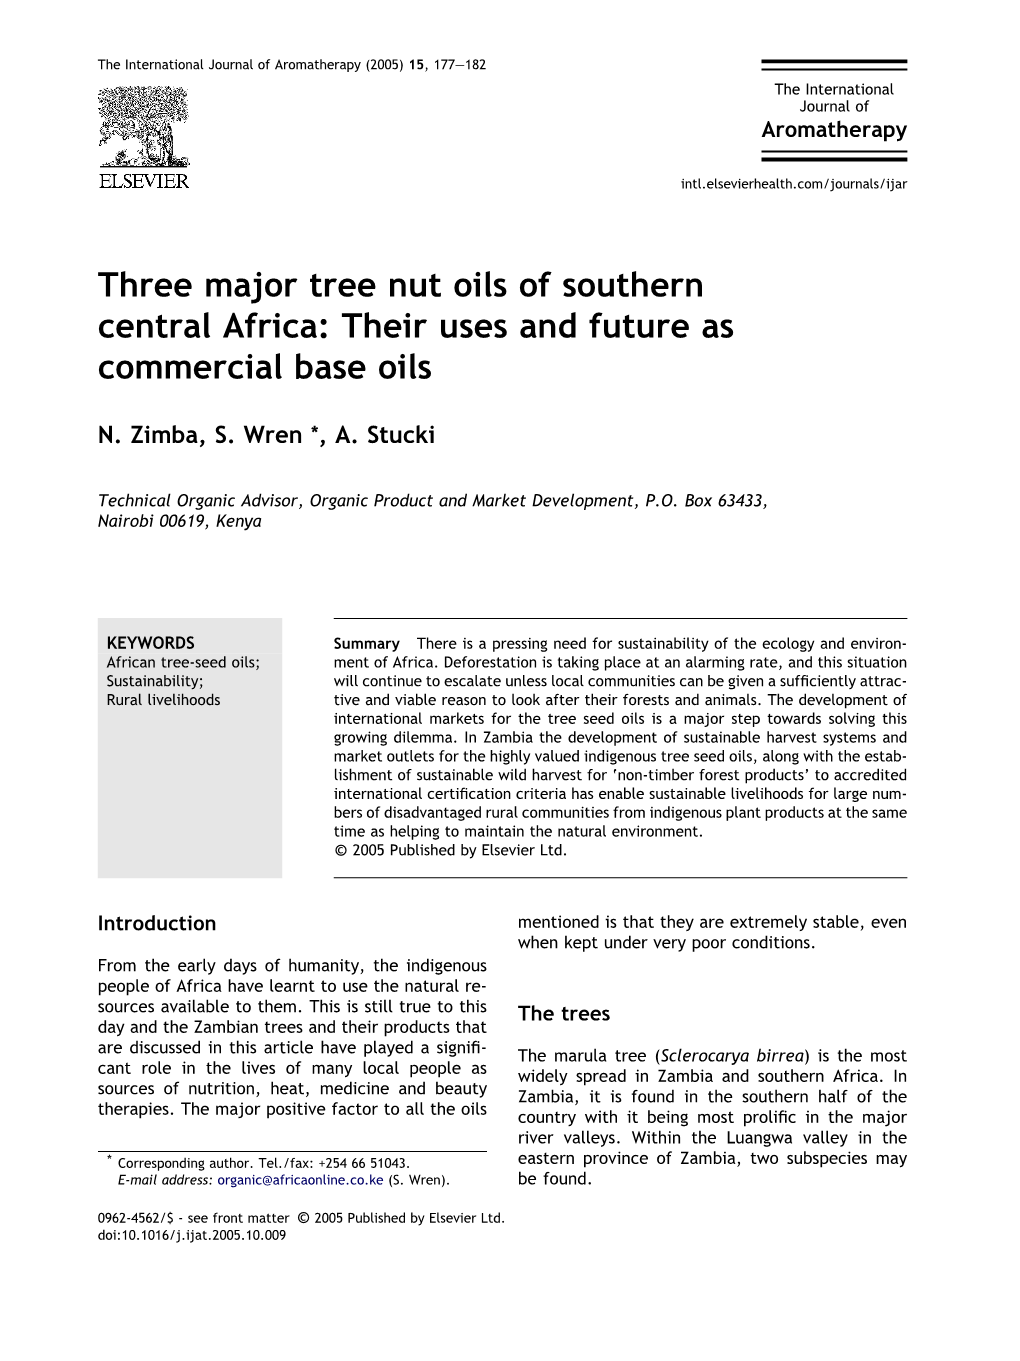 Three Major Tree Nut Oils of Southern Central Africa: Their Uses and Future As Commercial Base Oils